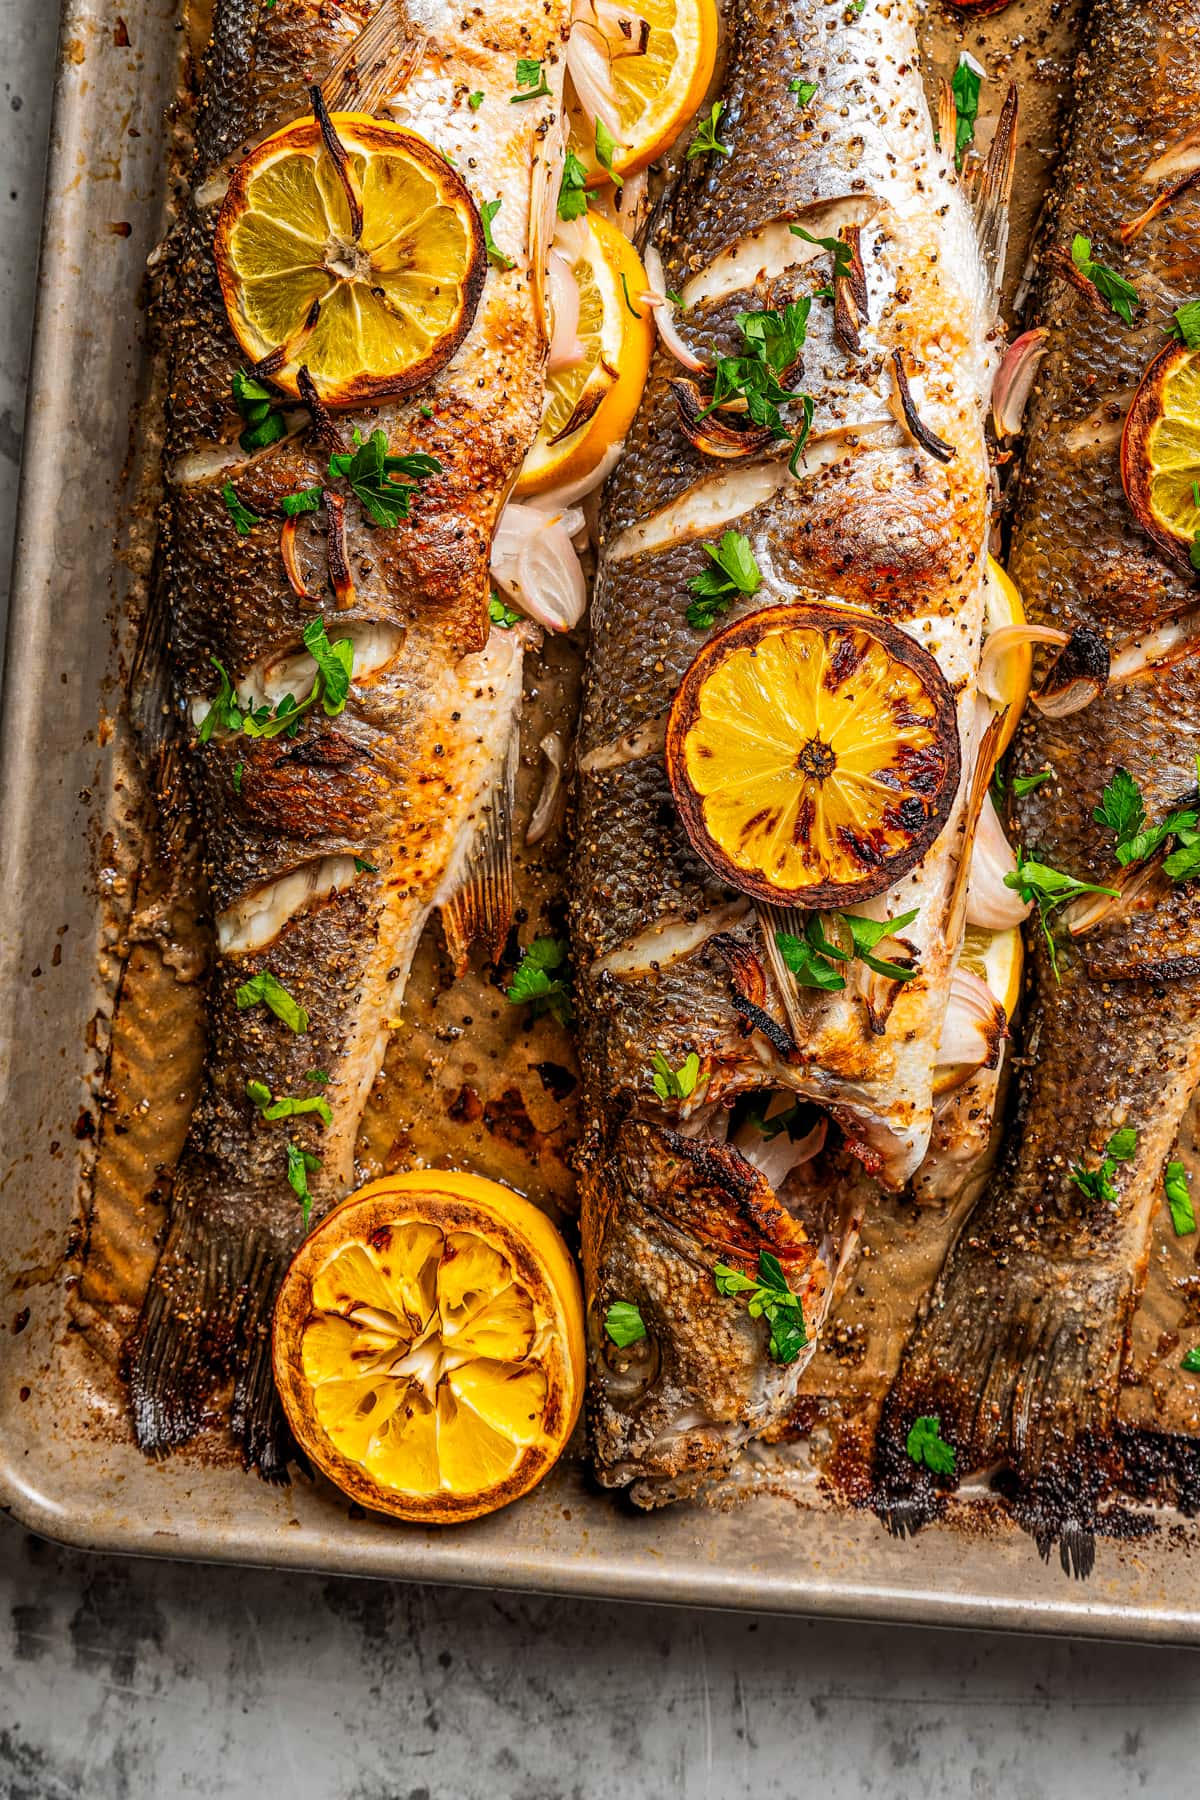 Up close photo of whole cooked fish garnished with herbs and lemon slices.